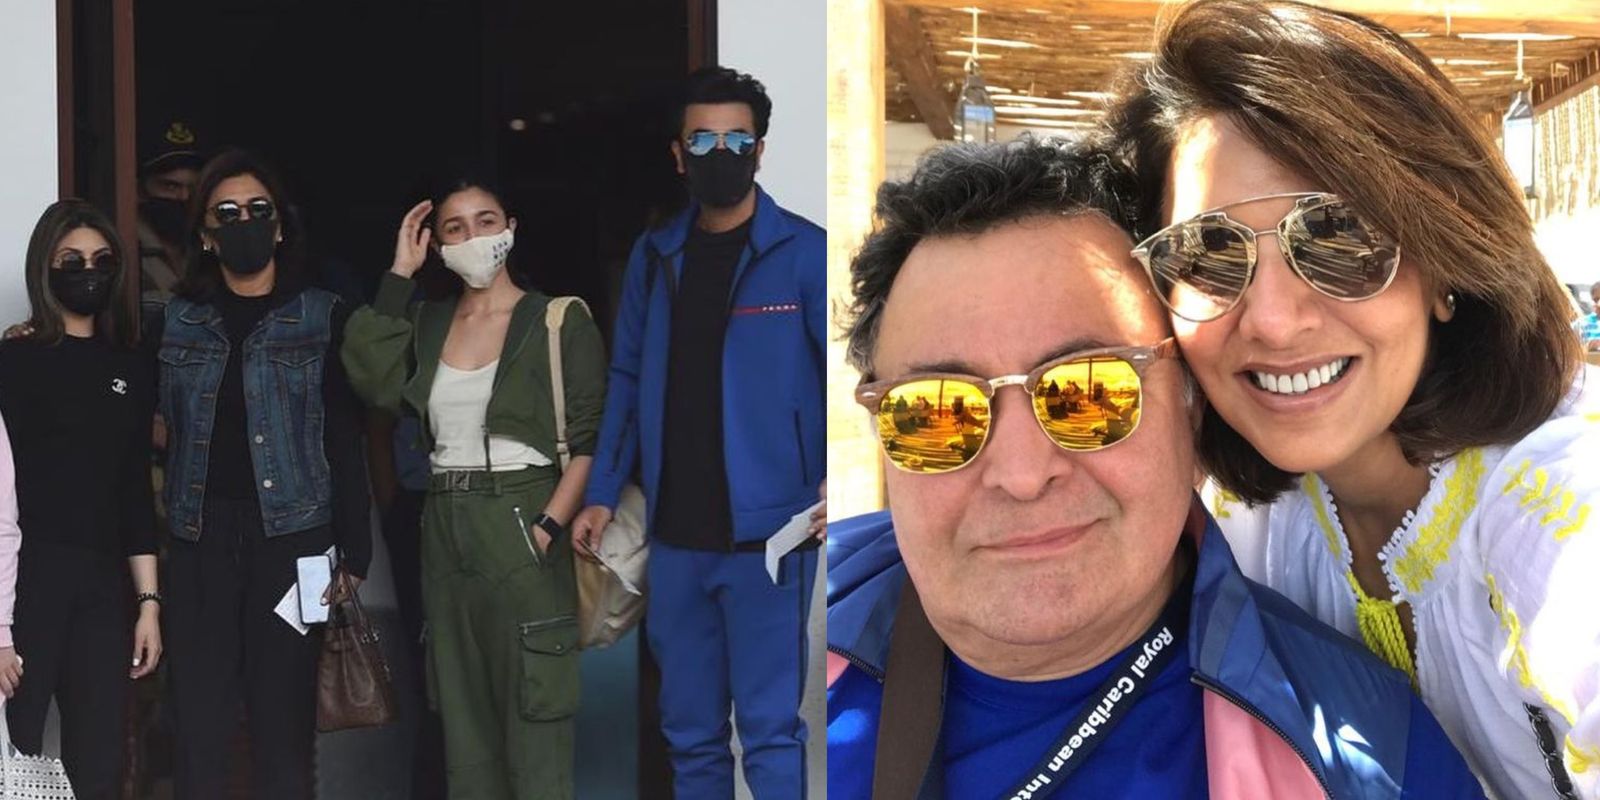 Ranbir Kapoor Jets Off With Alia Bhatt And His Family For A Vacay, Neetu Kapoor Relives Her Roller Coaster Of A Year